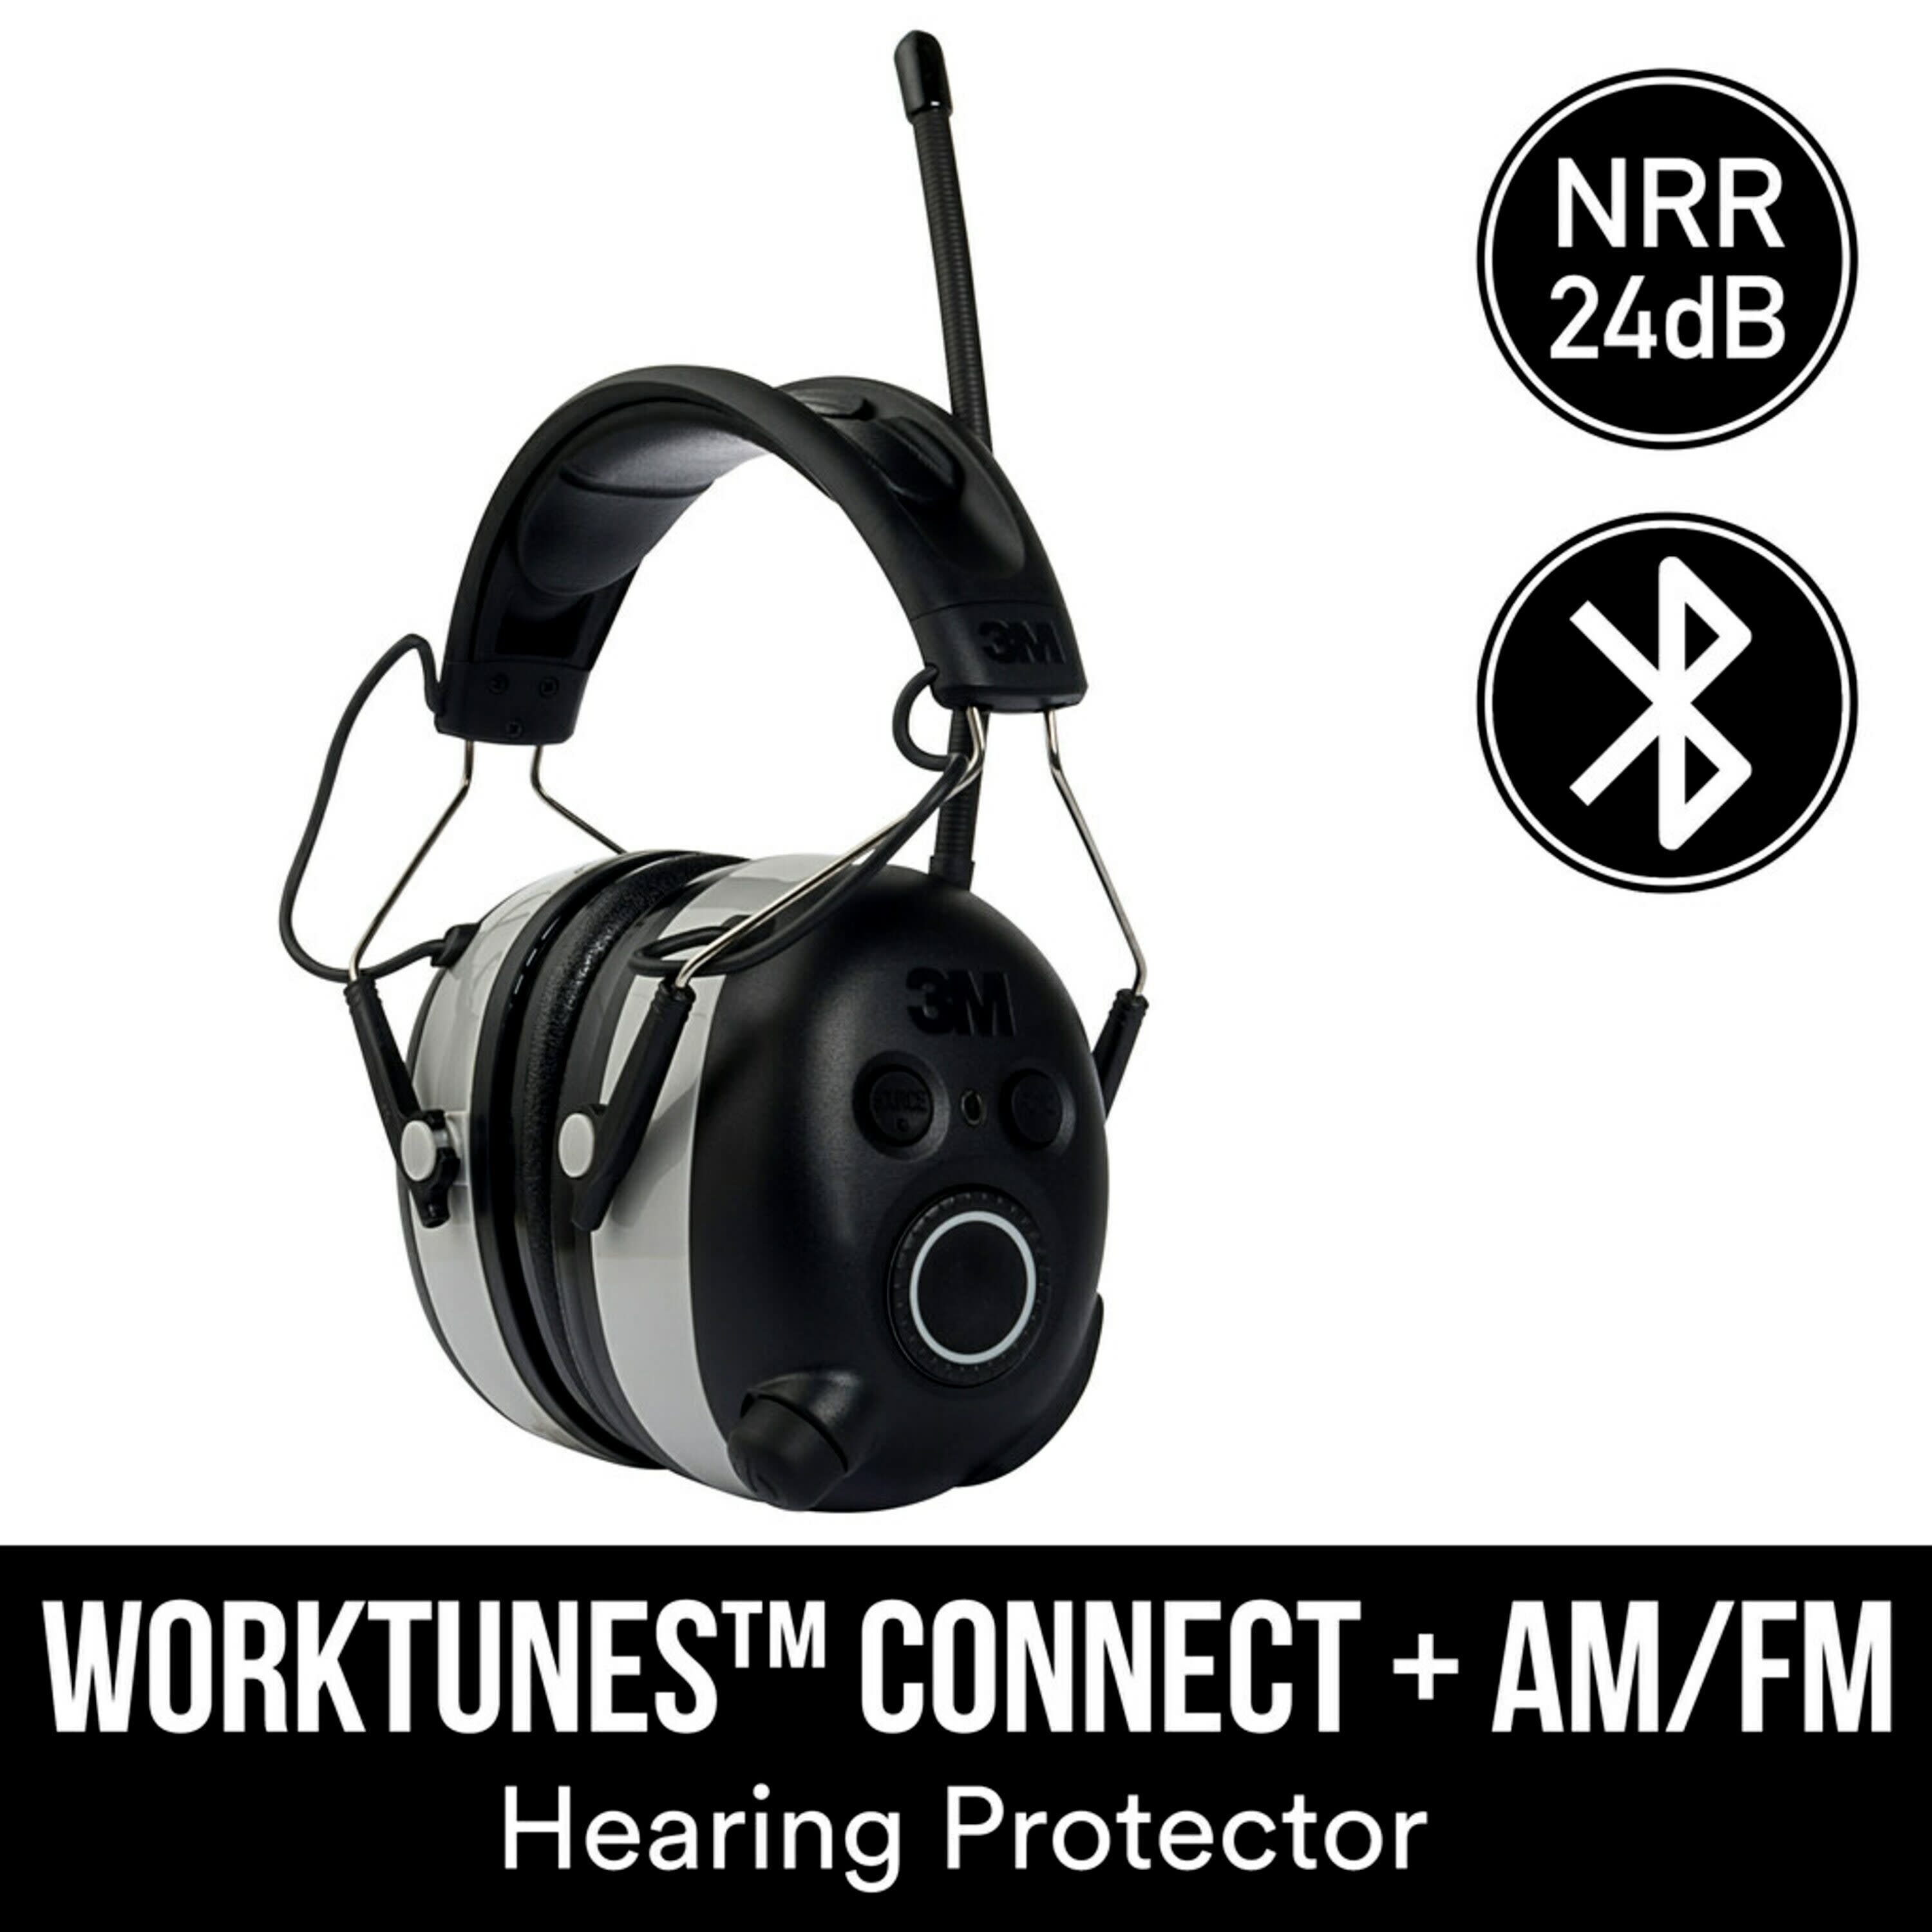 3M WorkTunes Connect Hearing Protector Bluetooth Technology Wireless Integrated 